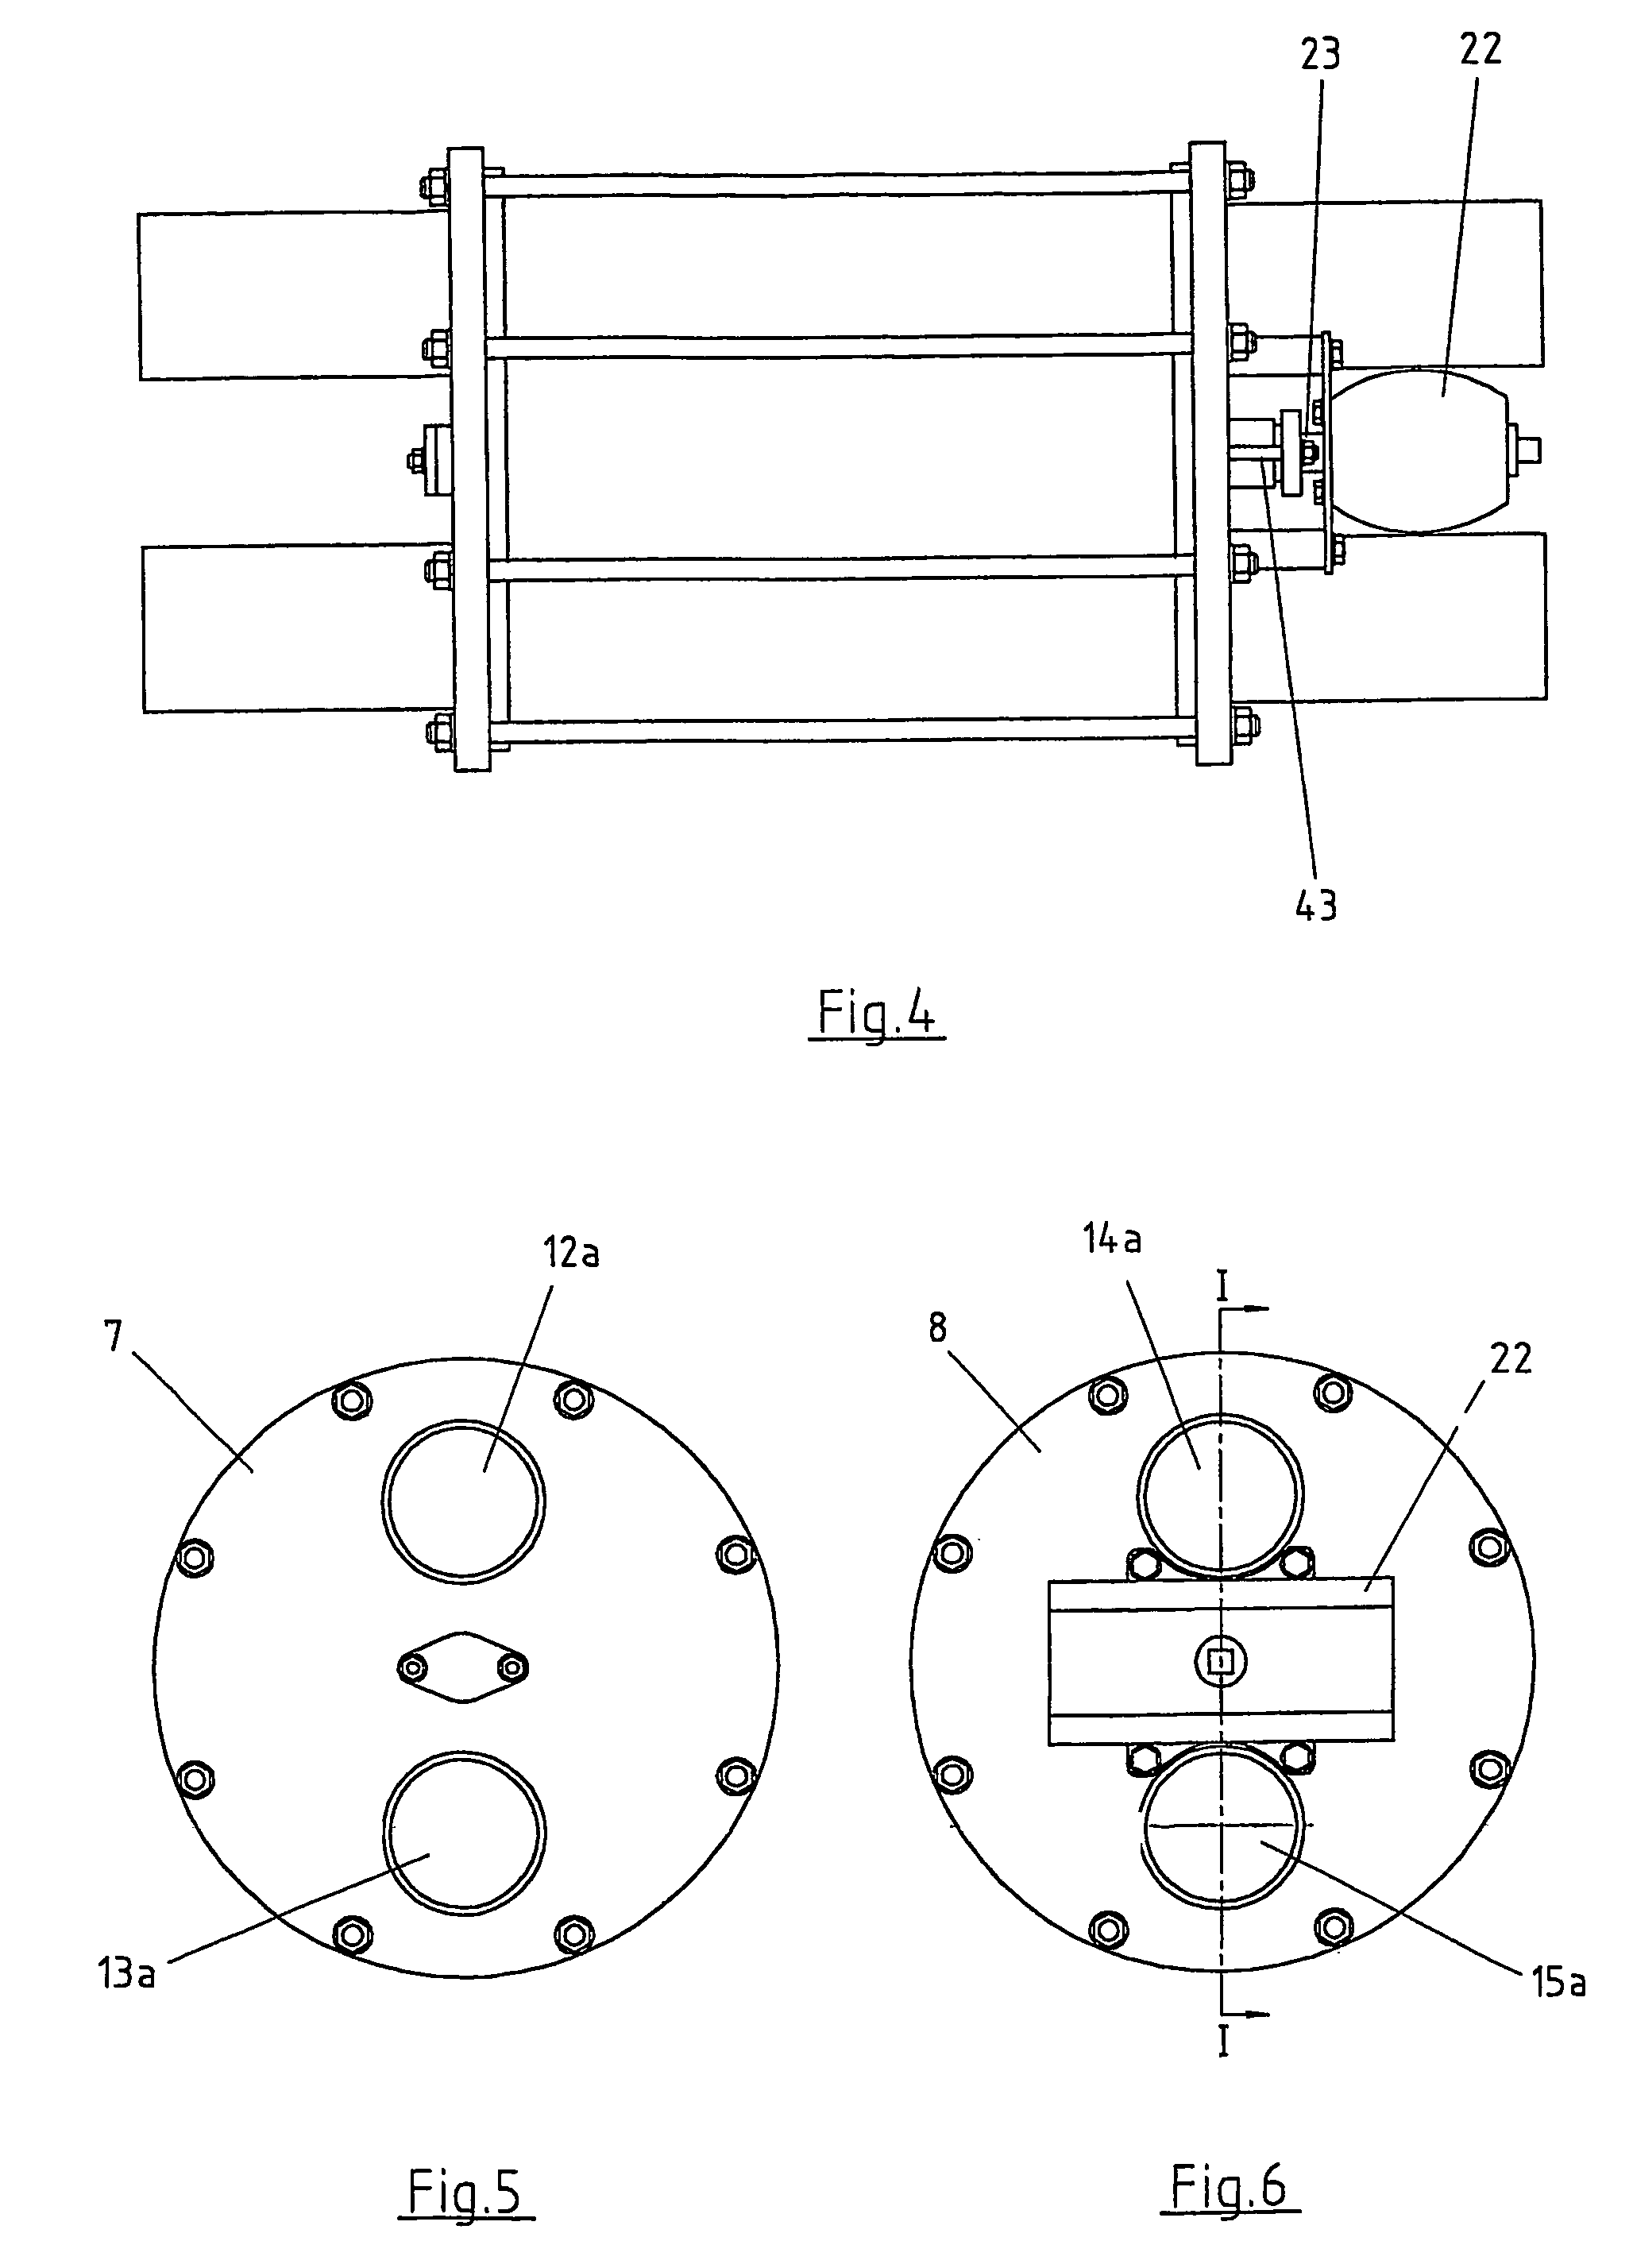 Valve for changing the direction of flow of a fluid in pipe conduits